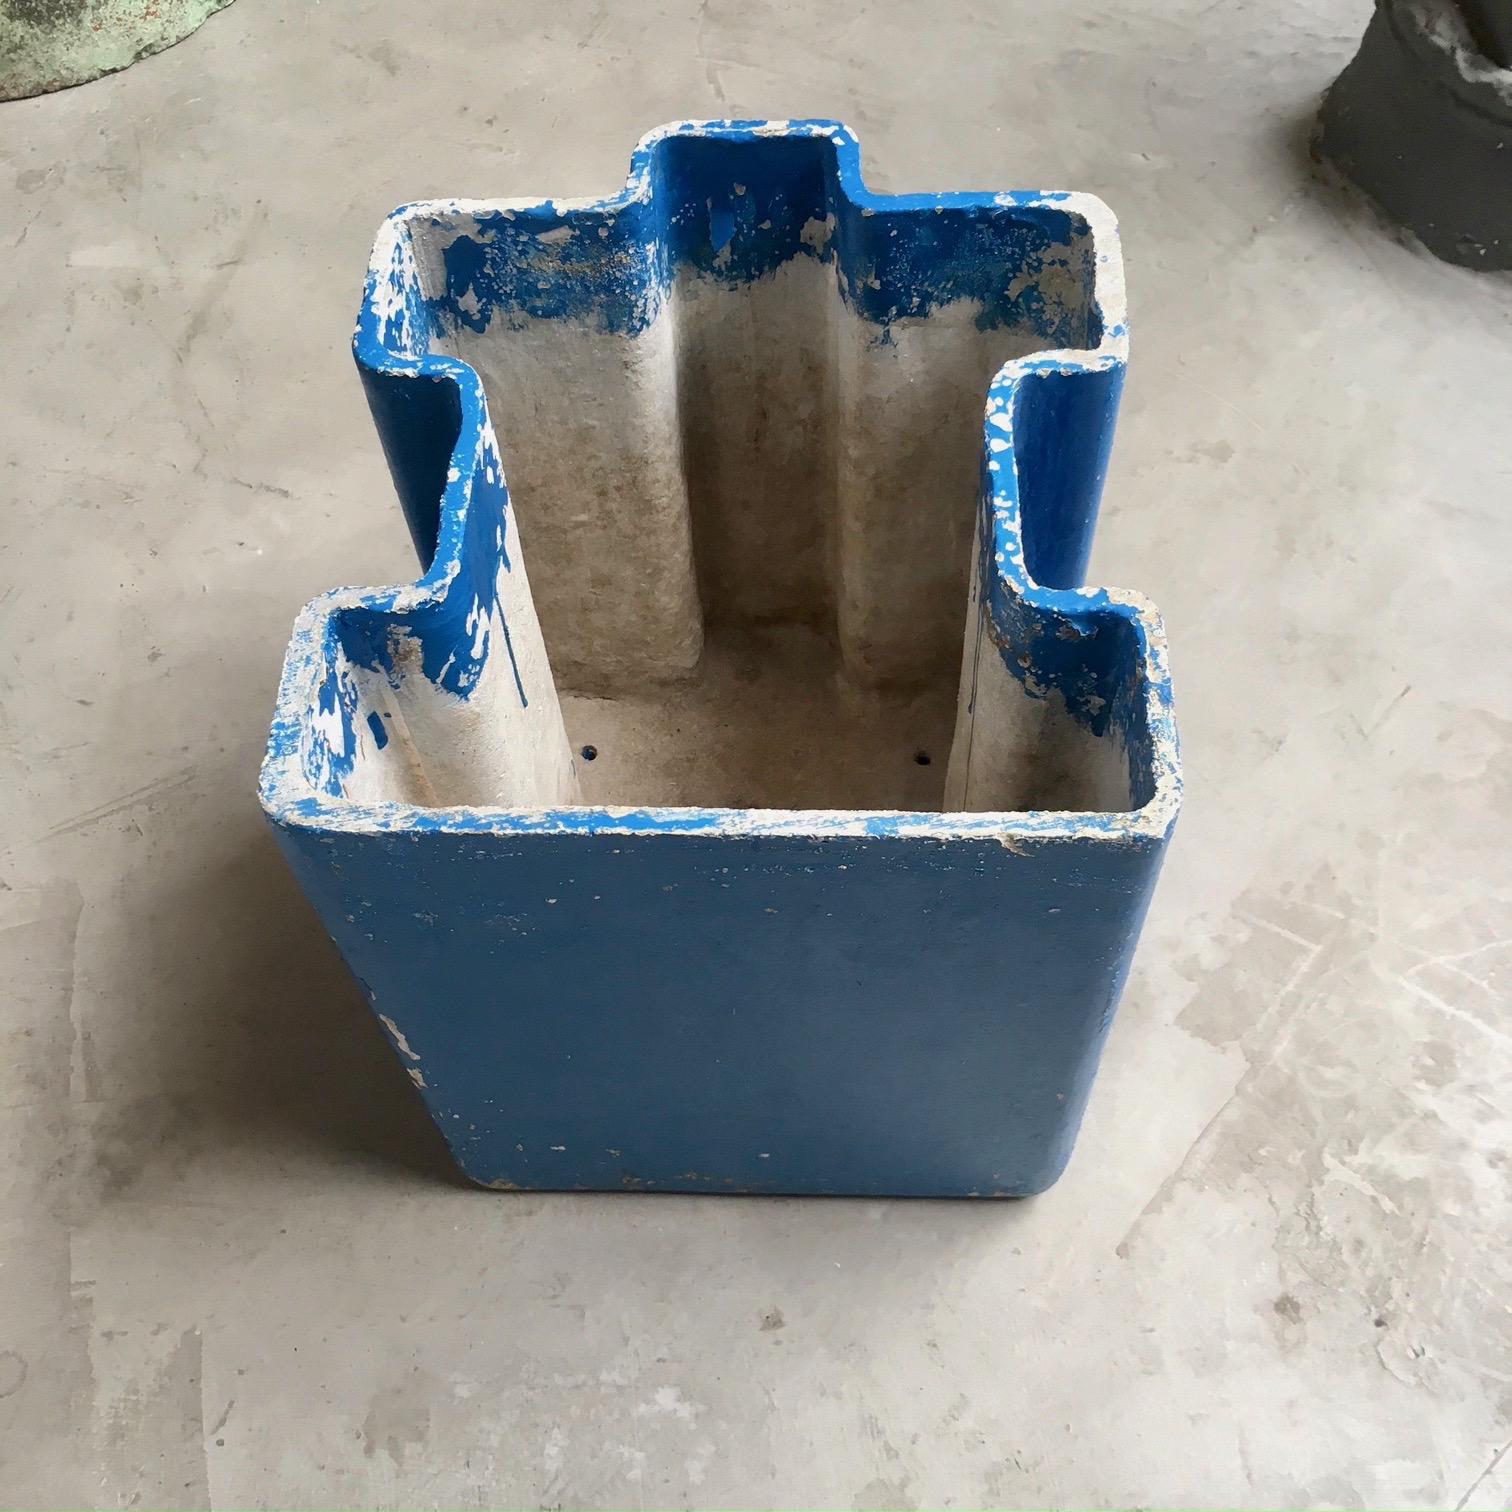 Fantastic piece of sculpture by Swiss architect Willy Guhl. Blue concrete planter in the shape of a jigsaw puzzle piece. Cool sculptural piece for indoors or outside. Great standalone piece of art. Excellent vintage condition.

Only the blue